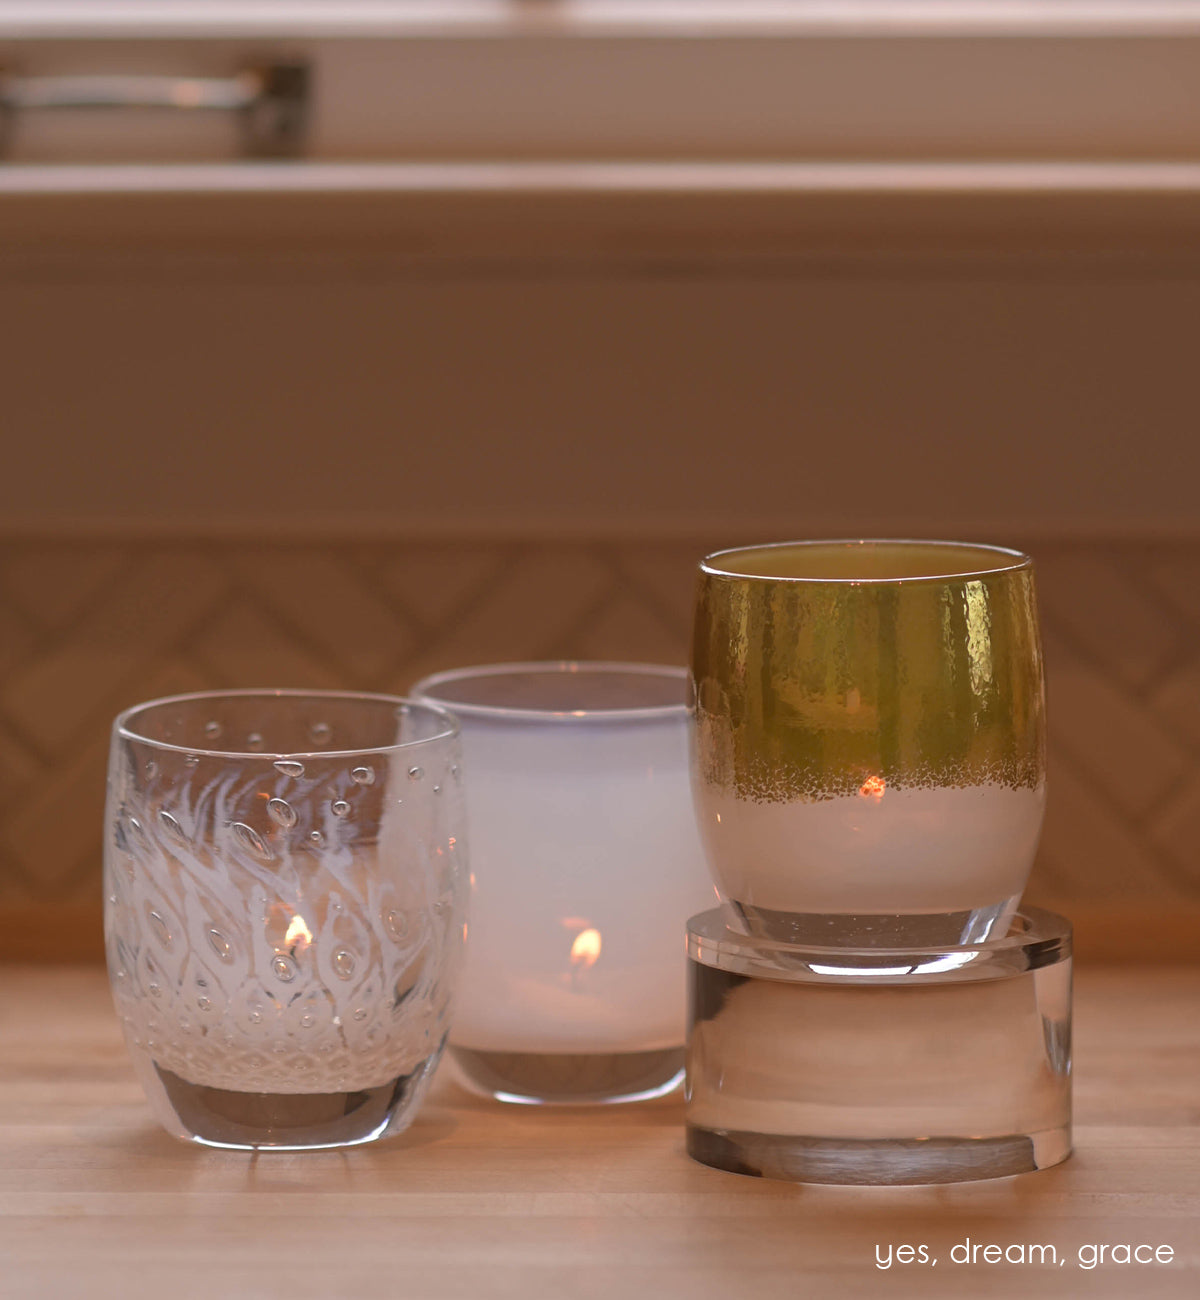 acrylic round baby stand for glassybaby hand-blown glass votive candle holder. Paired with yes, dream, and grace.